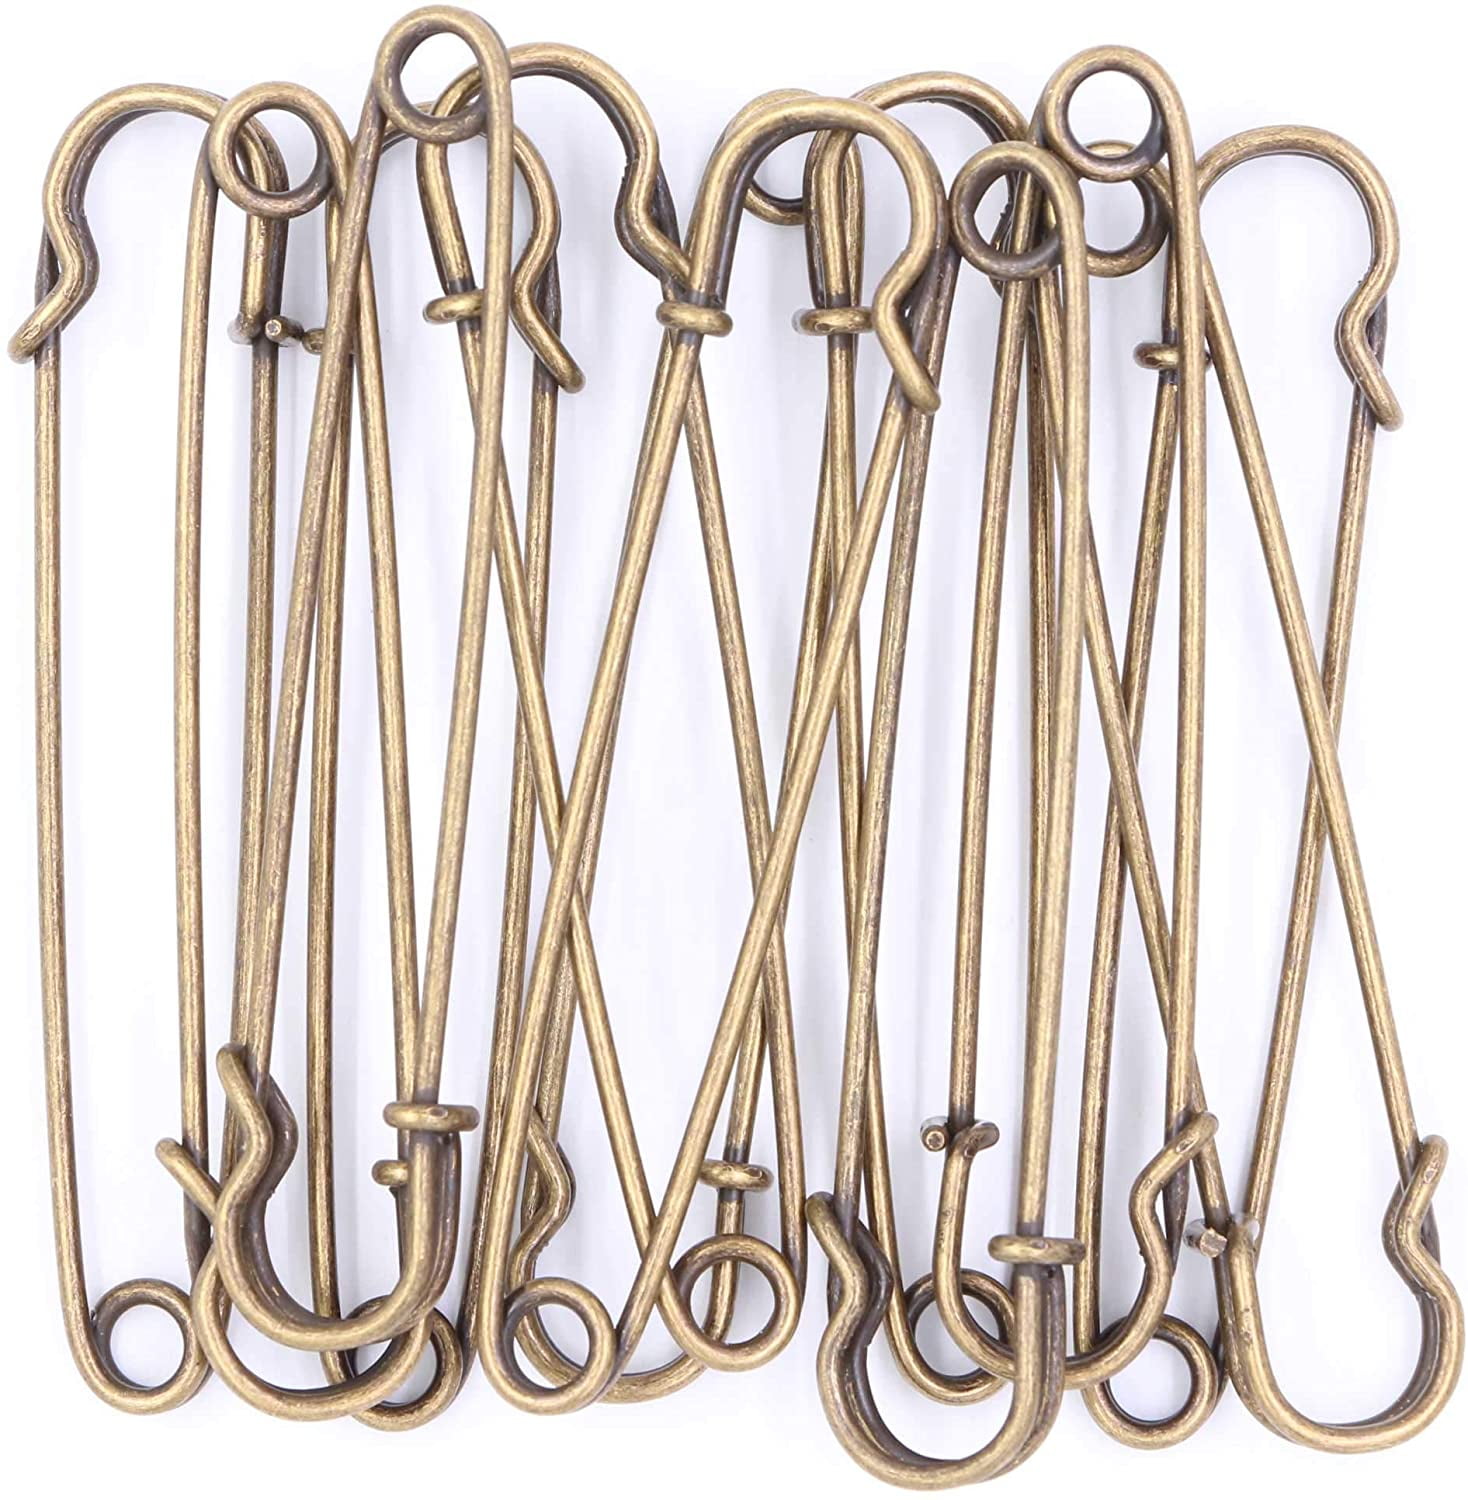 40 PiecesExtra Large Safety Pins Steel Blanket Pins Bulk Gold Big Safety  Pins Giant Heavy Duty Safety Pins Decorative Safety Pins for DIY Crafts  Skirts Kilts Brooch Making 